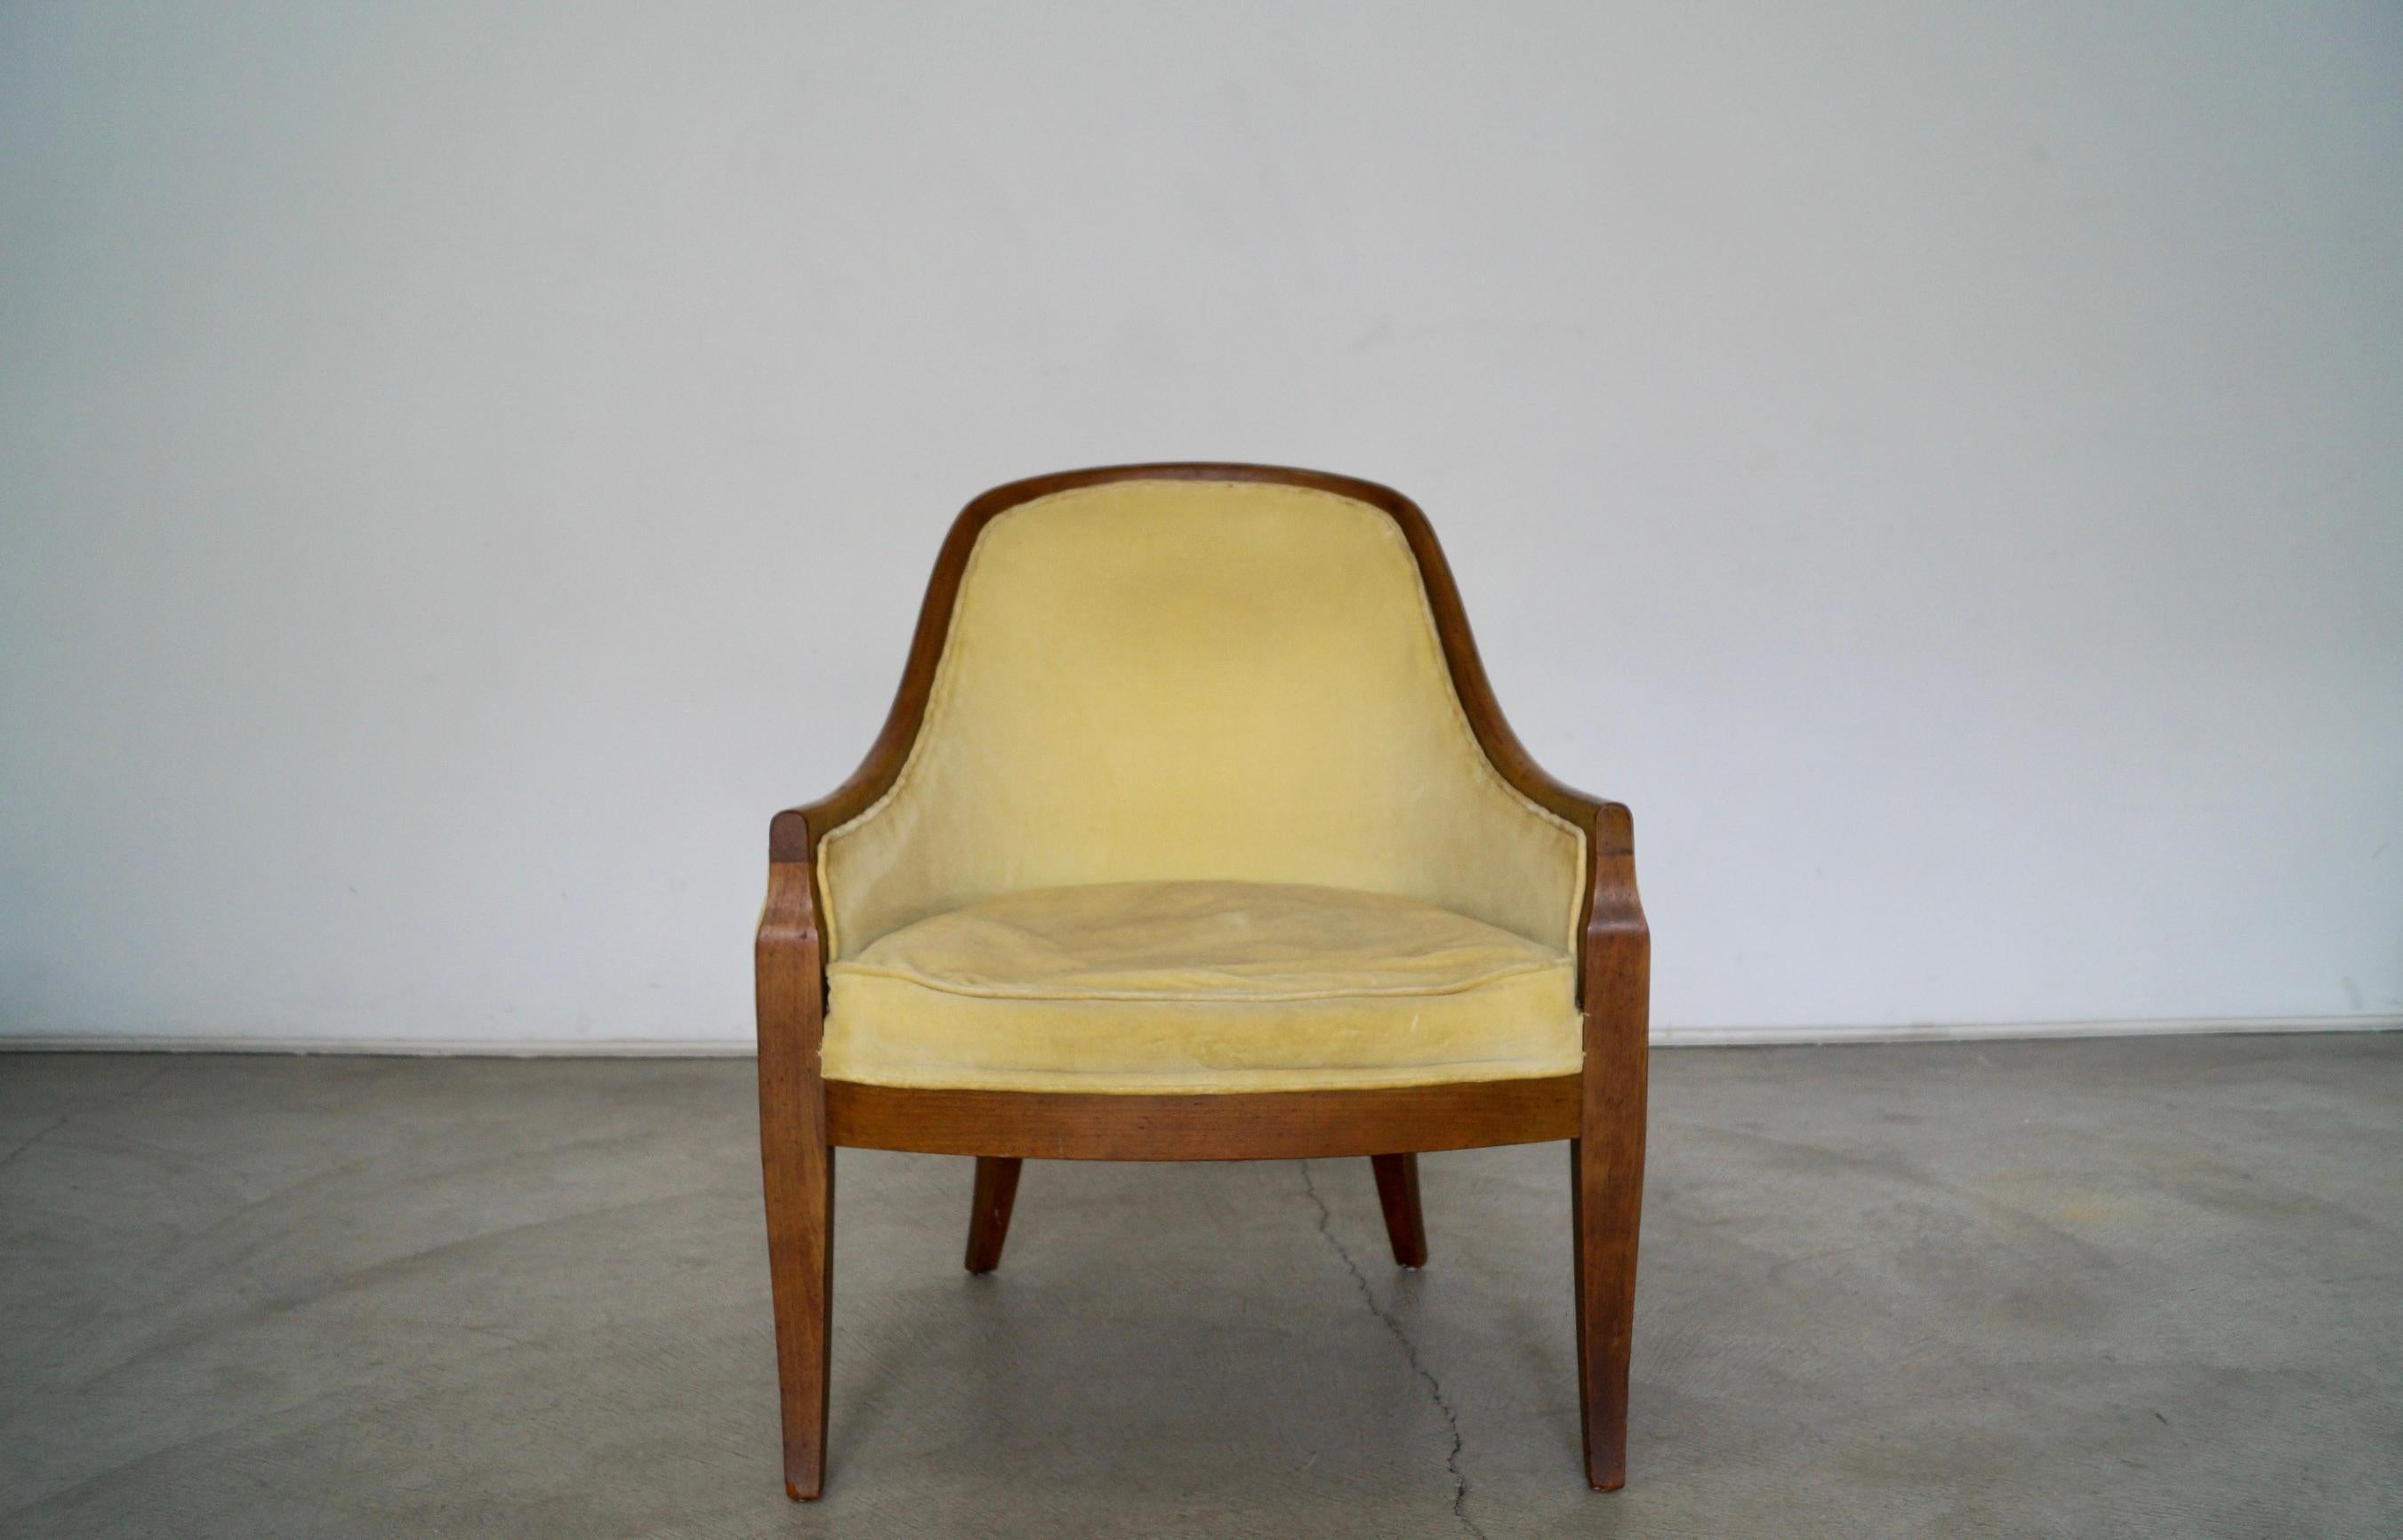 Vintage Mid-Century Modern gondola armchair for sale. Incredibly solid, and very well constructed. It has a solid walnut frame with coil springs on the seatrest. The velvet is work and needs to be reupholstered. the chair frame needs to be